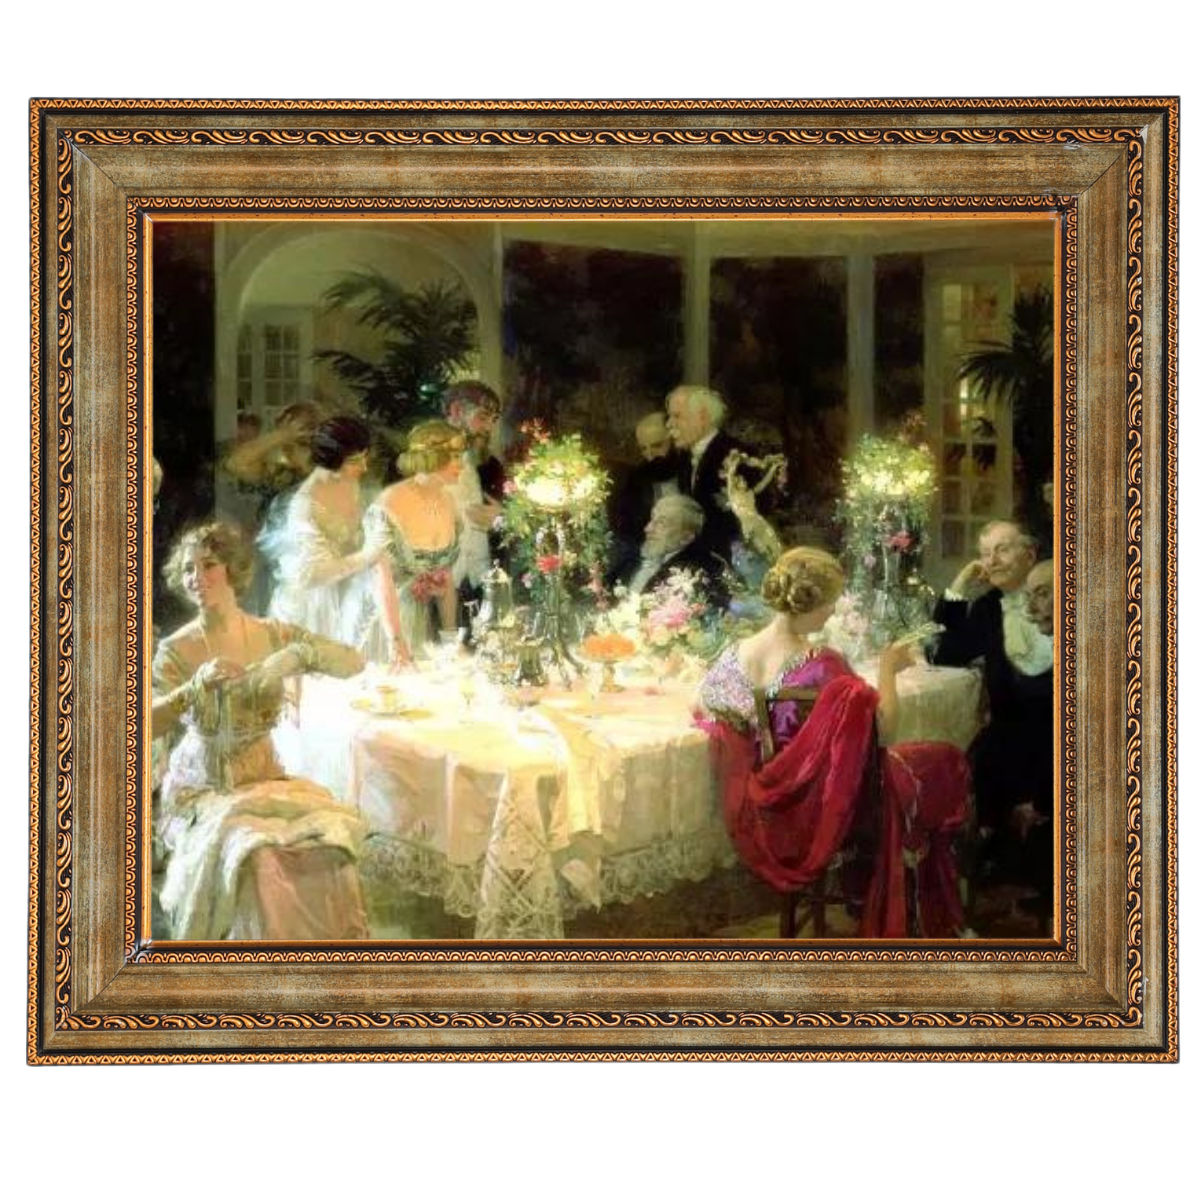 The End of Dinner - Vintage Wall Art Prints Decor For Dining Room